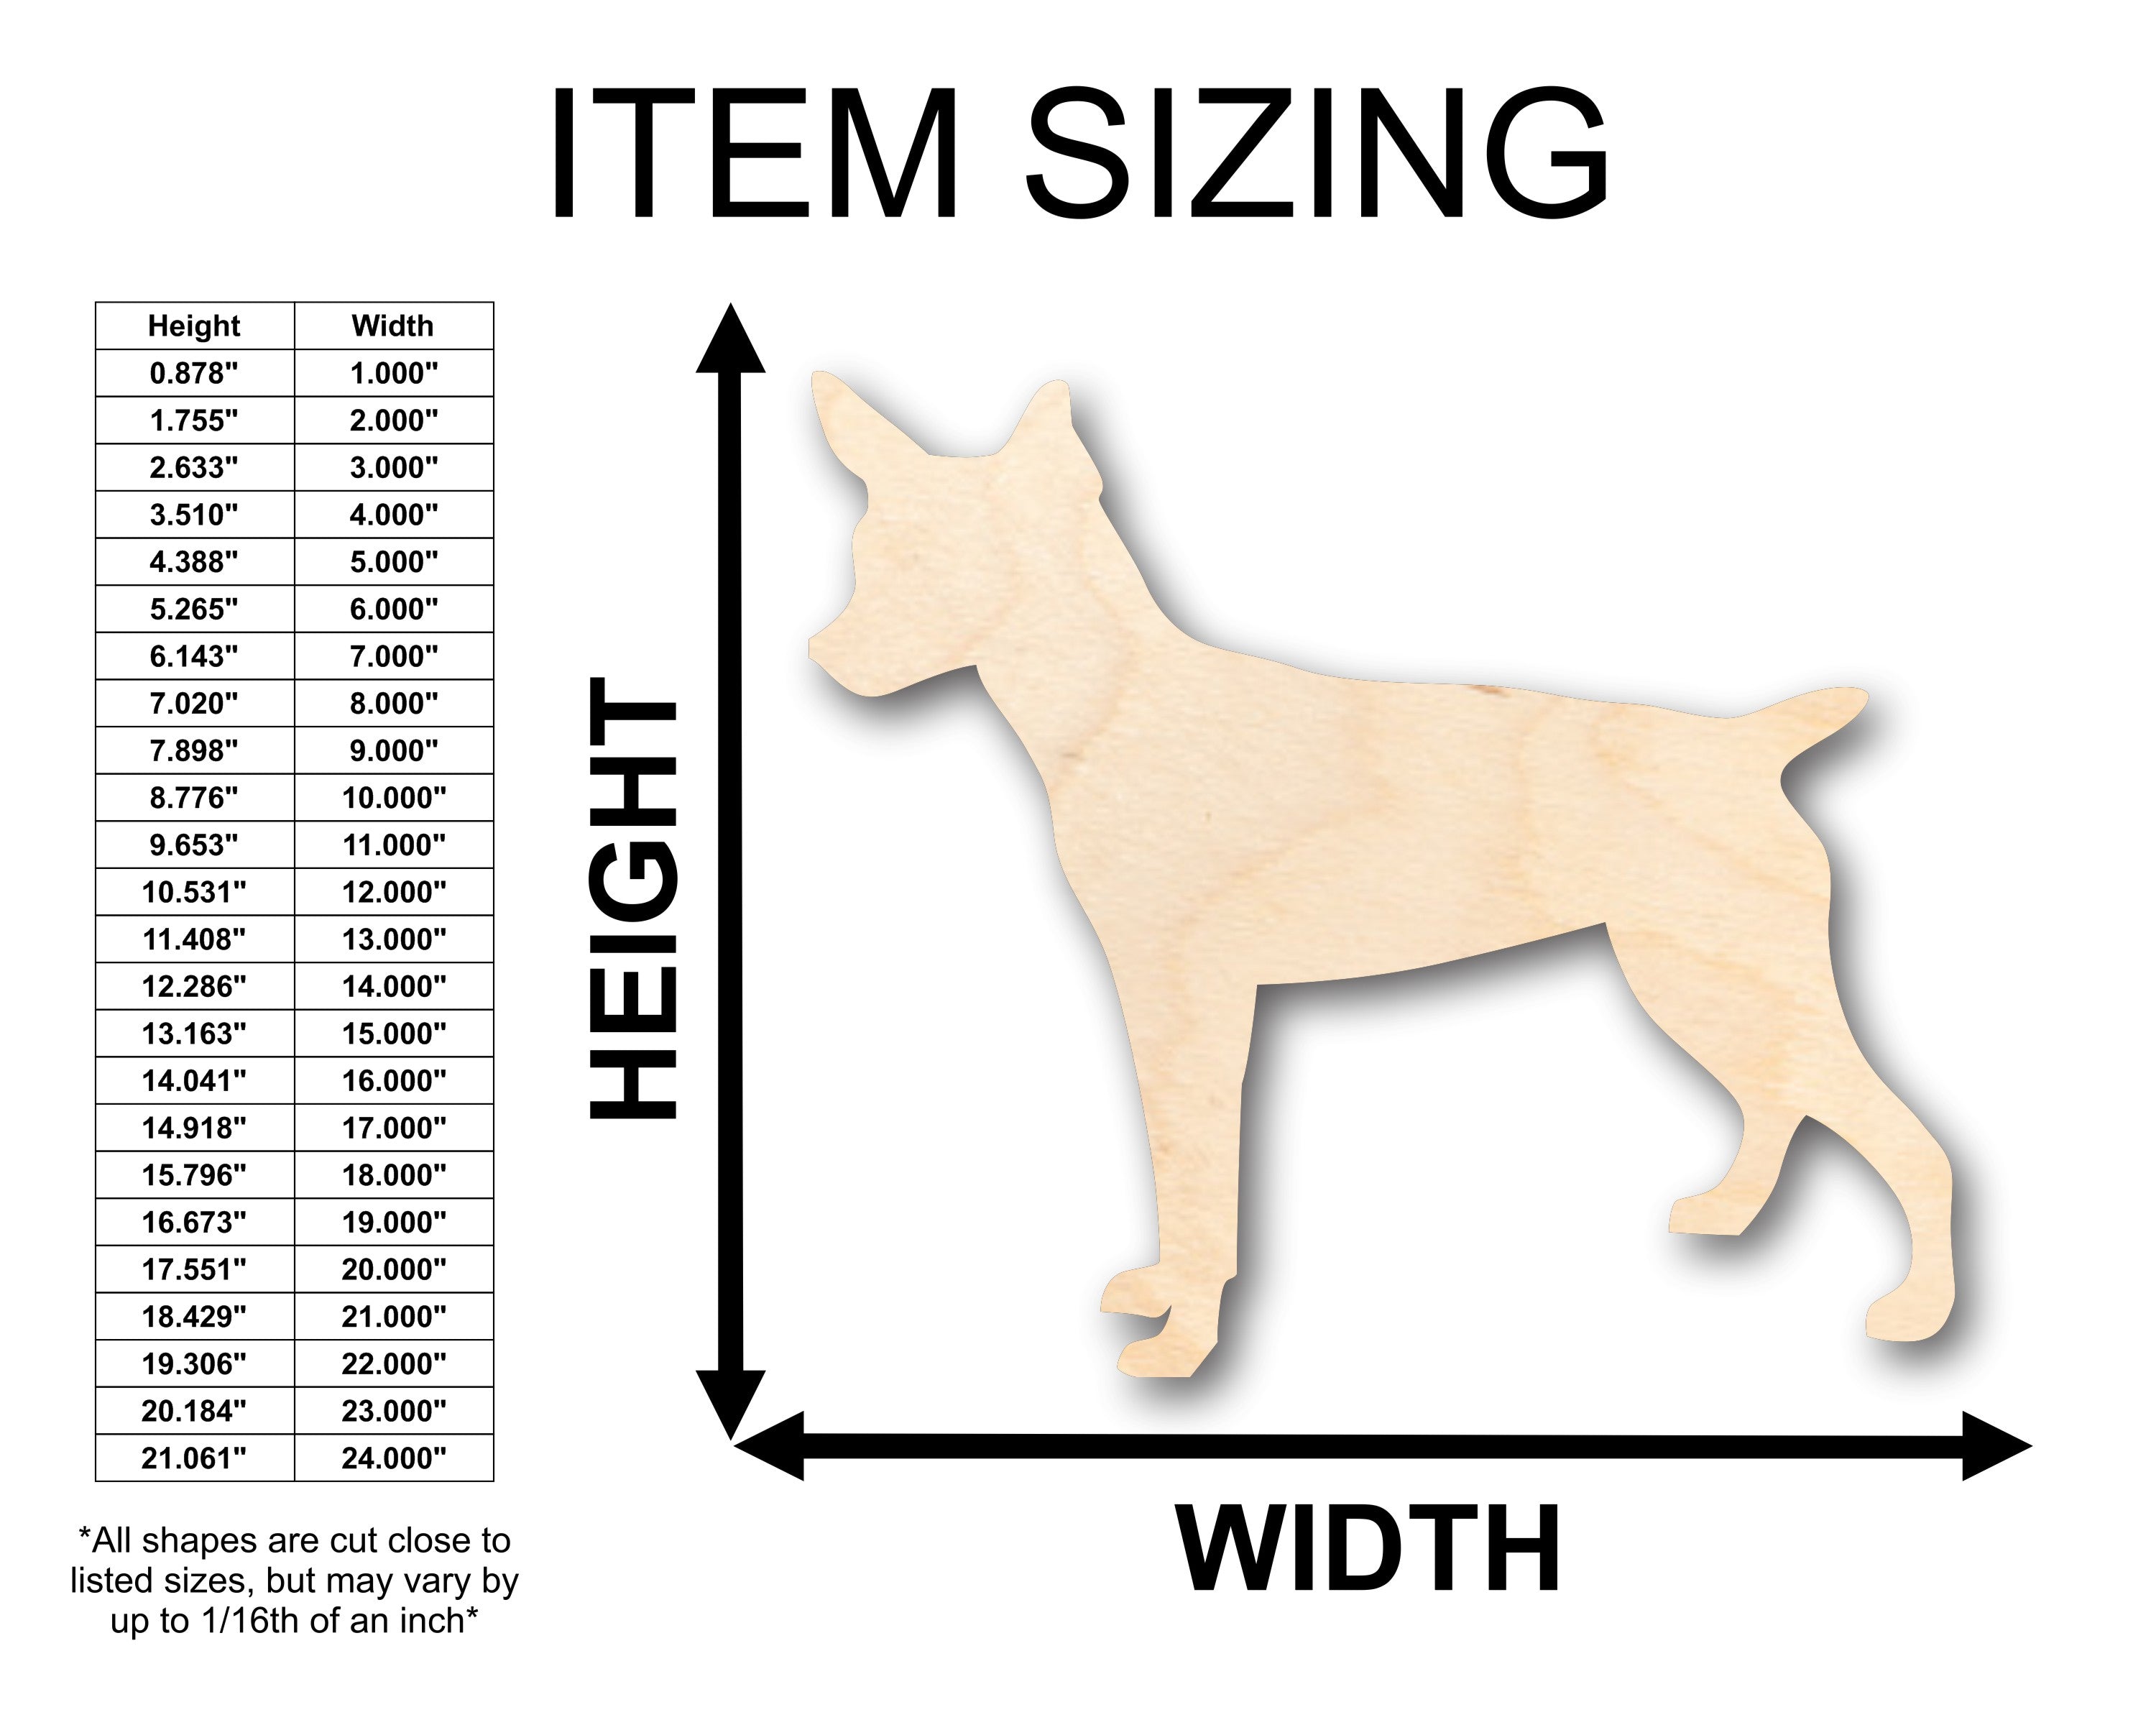 Unfinished Wood Rat Terrier Small Dog Shape - Craft - up to 36